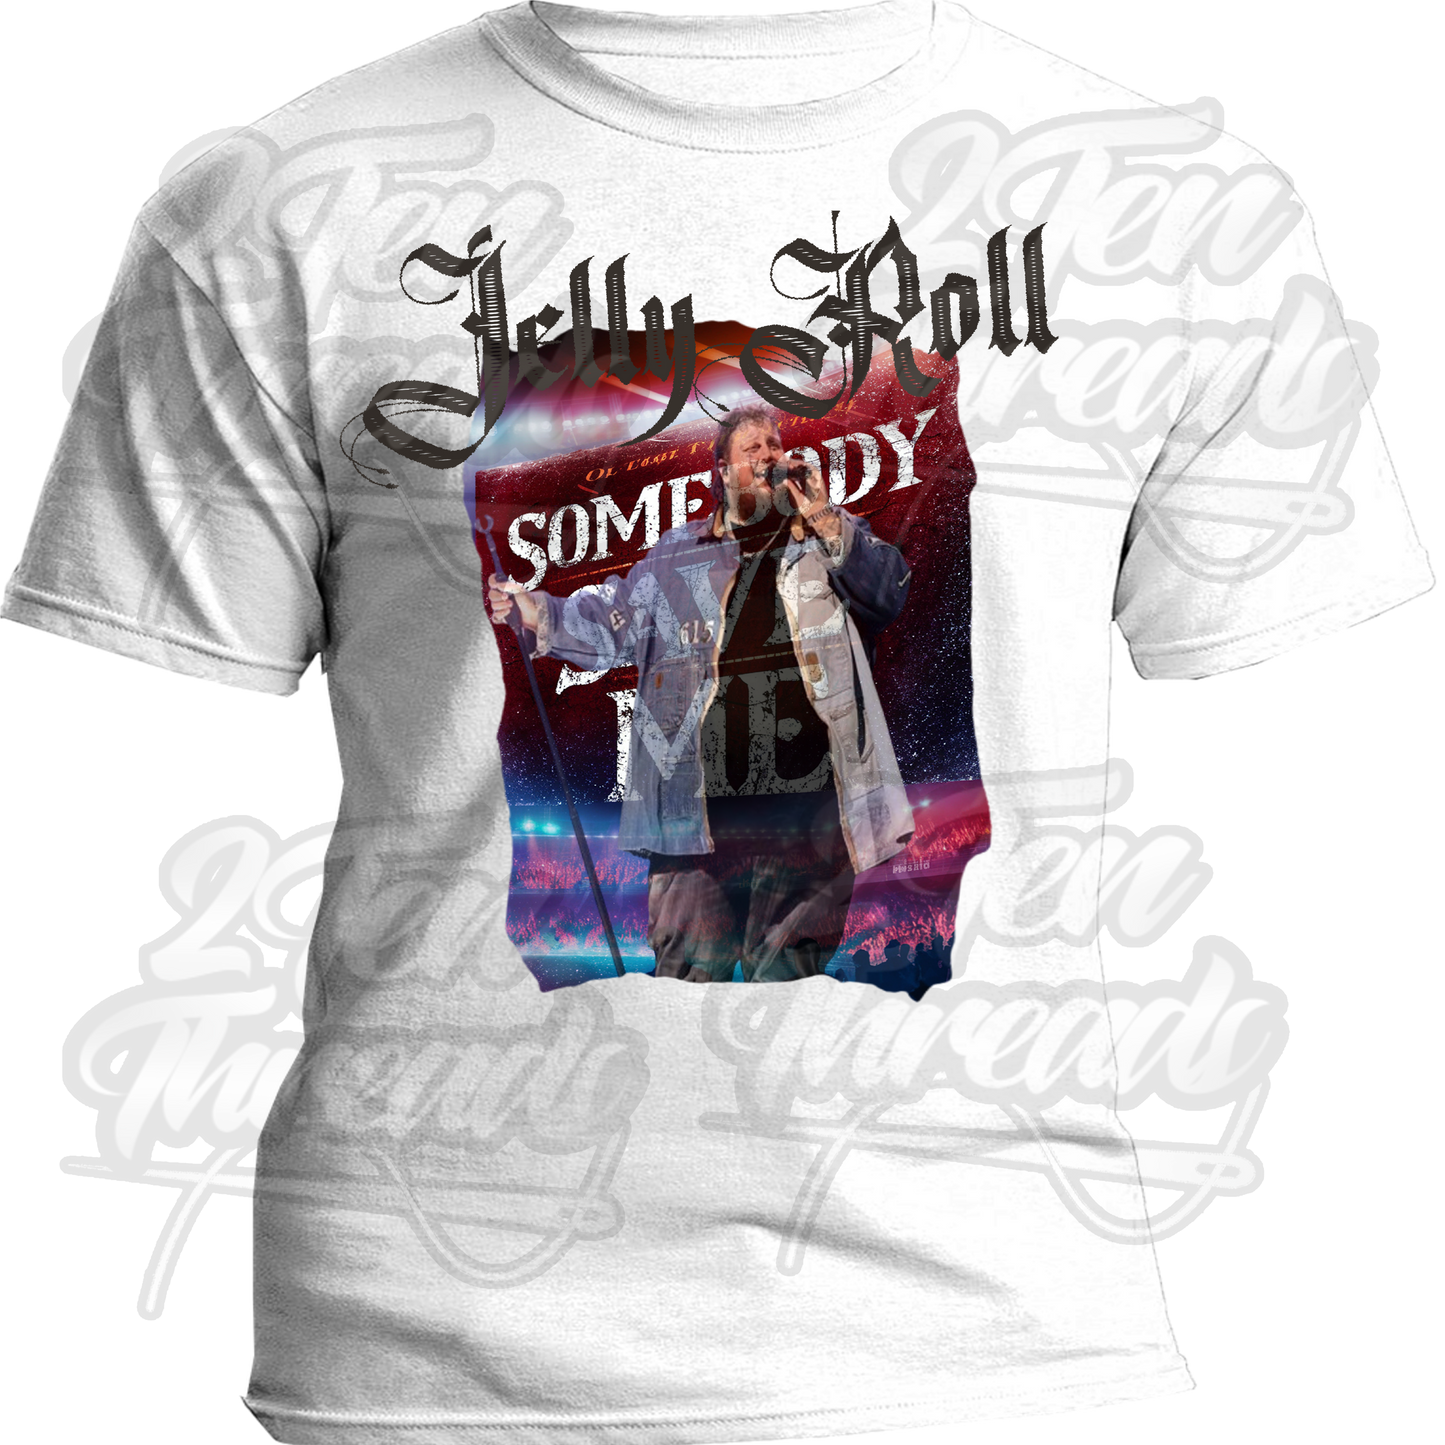 Jelly Roll Somebody Save me Shirt